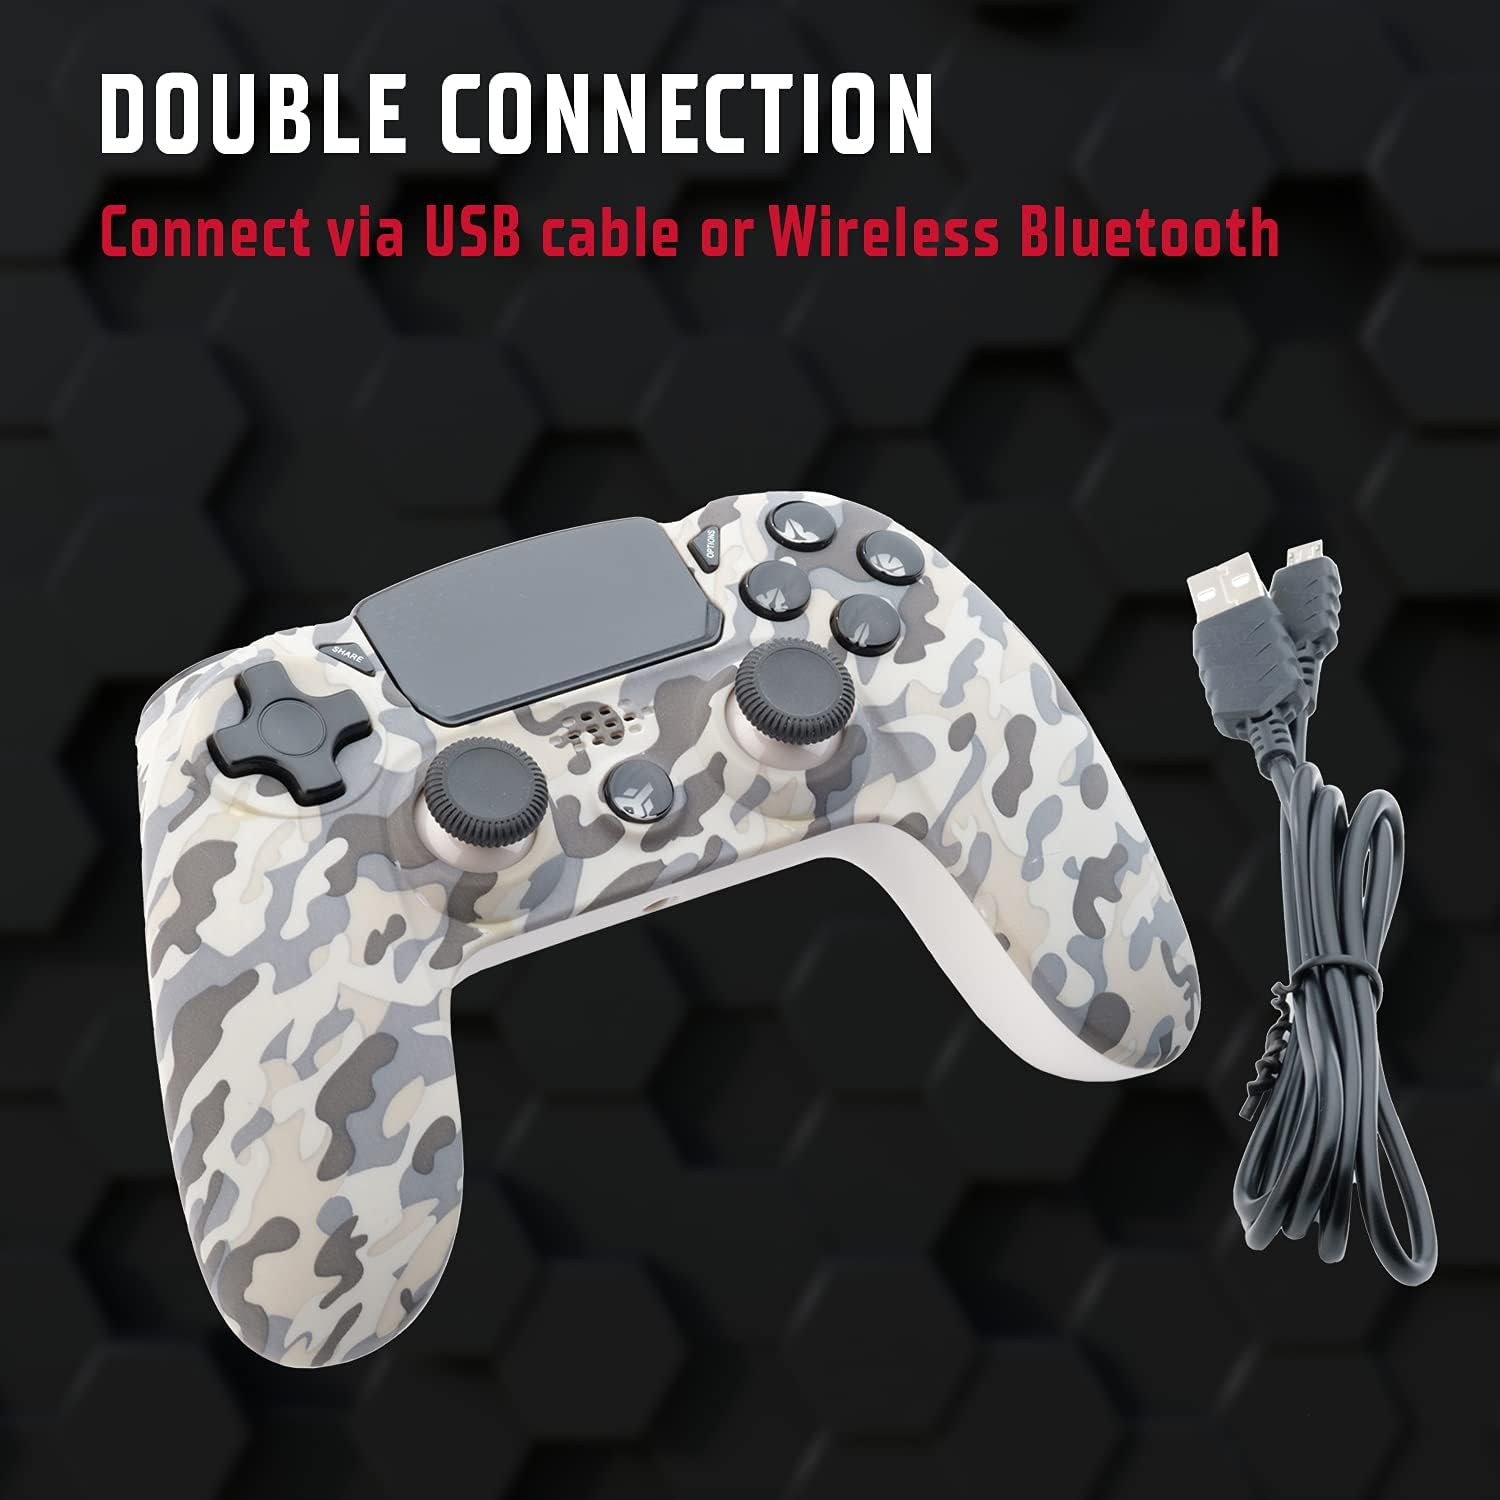 GAMEPAD CONTROLLER PC, PS4, Bluetooth, DualShock, Progr Keys, TouchPad Axis6, CAMO WHITE 